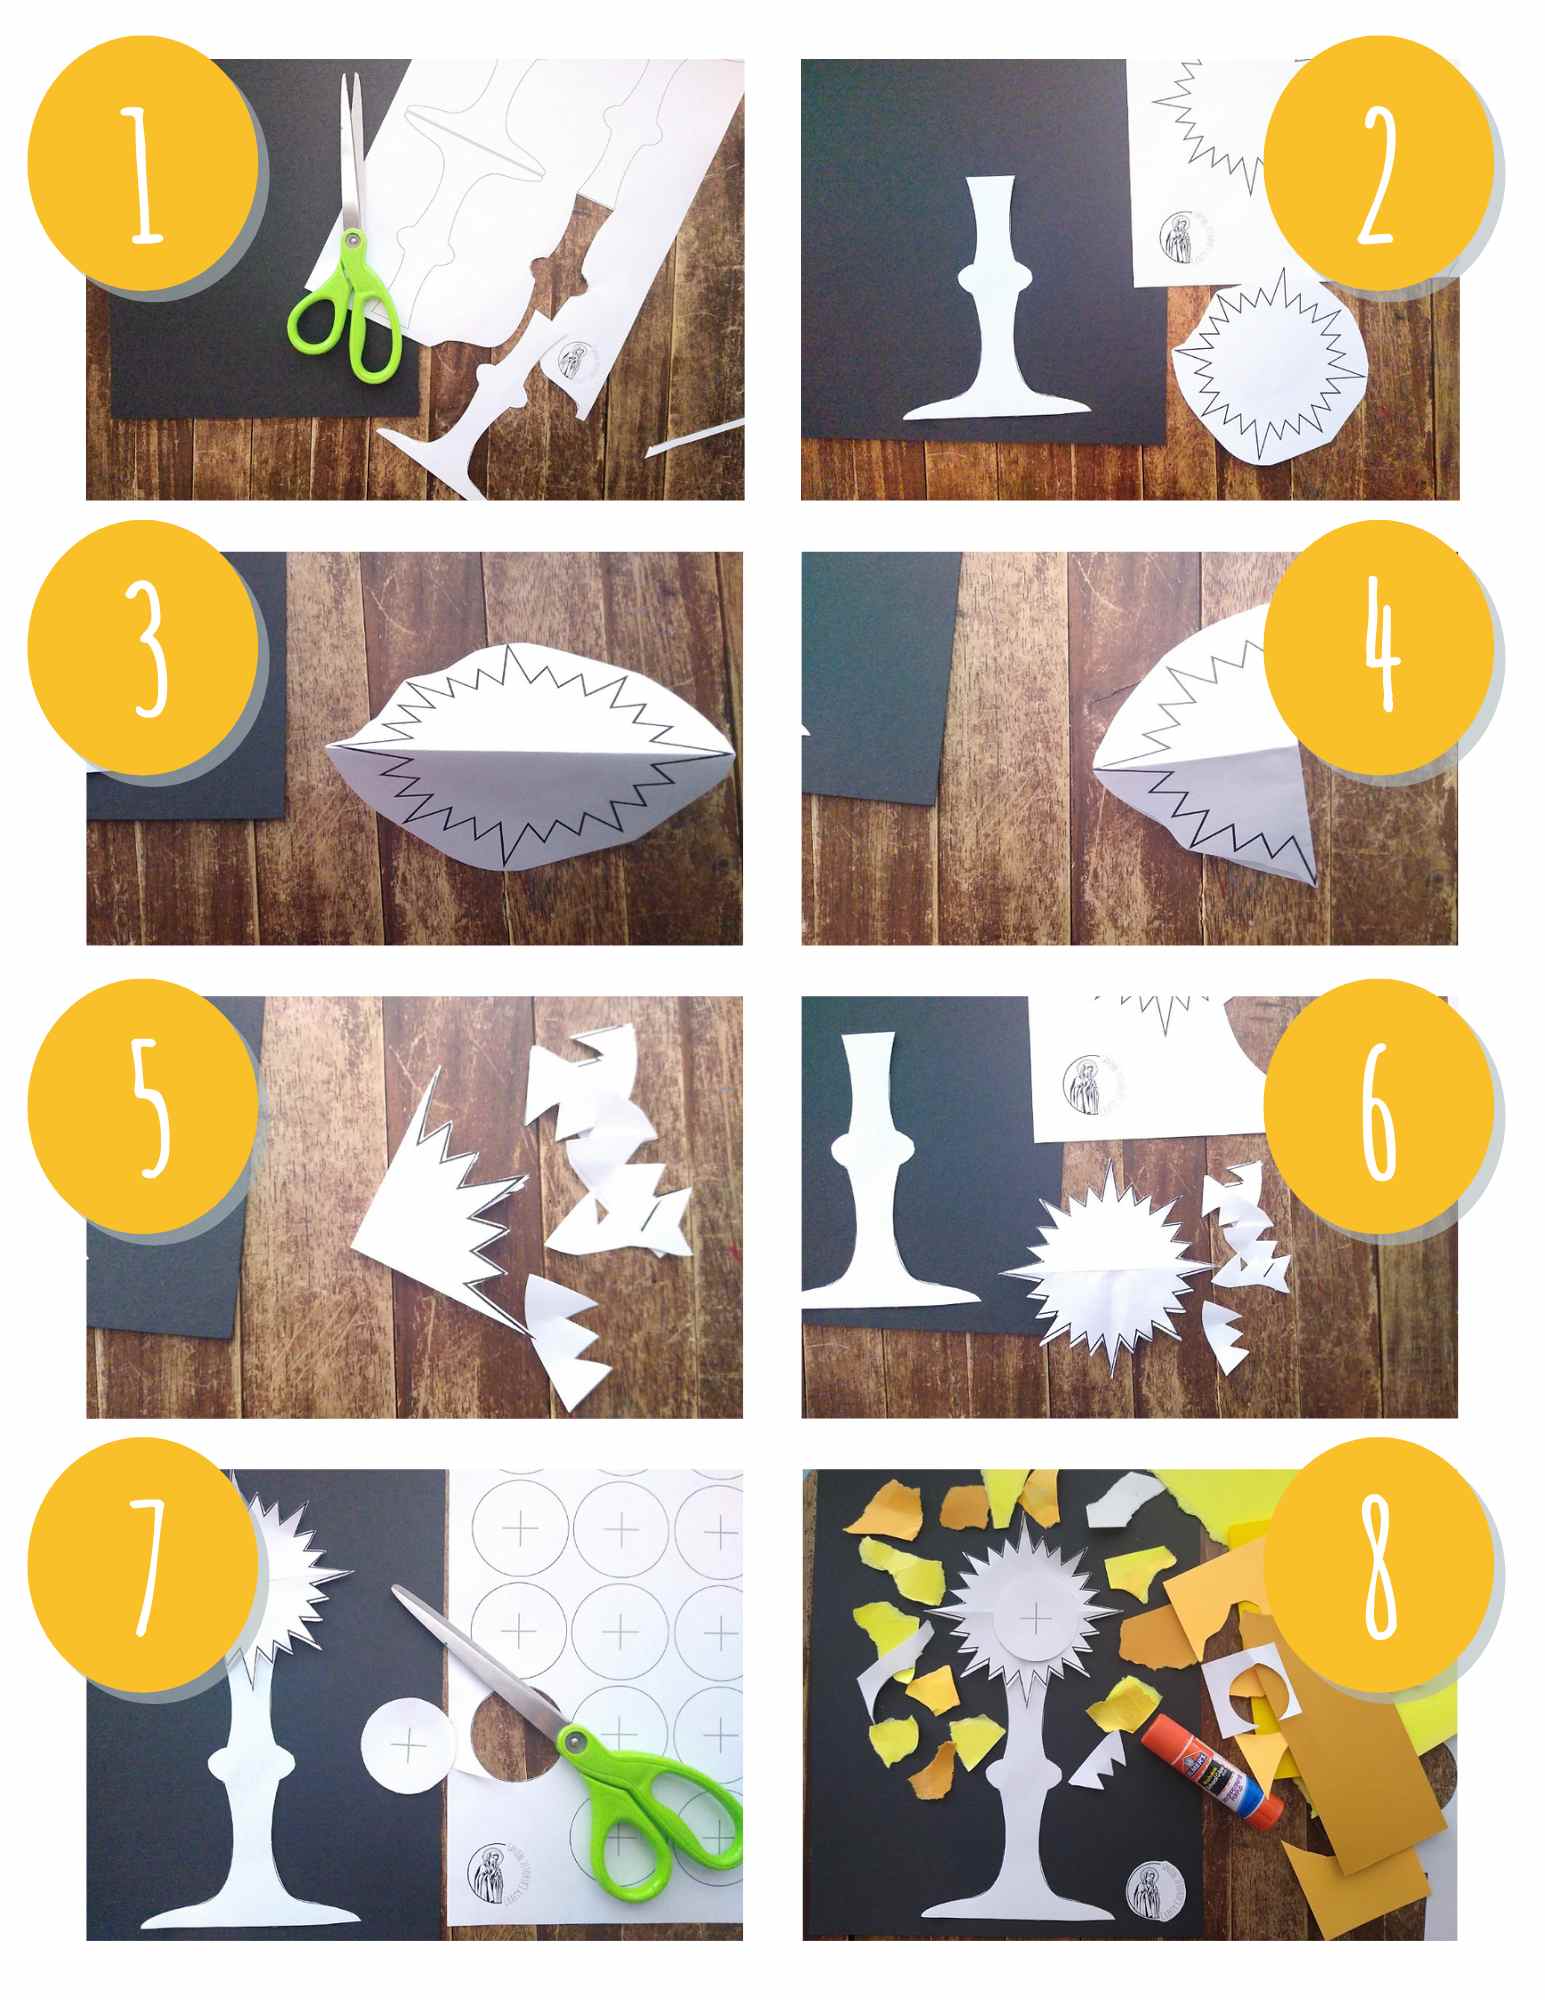 steps to make a torn paper monstrance by cutting out pieces of printable pdfs and gluing them in place, surrounded by torn pieces of yellow paper.